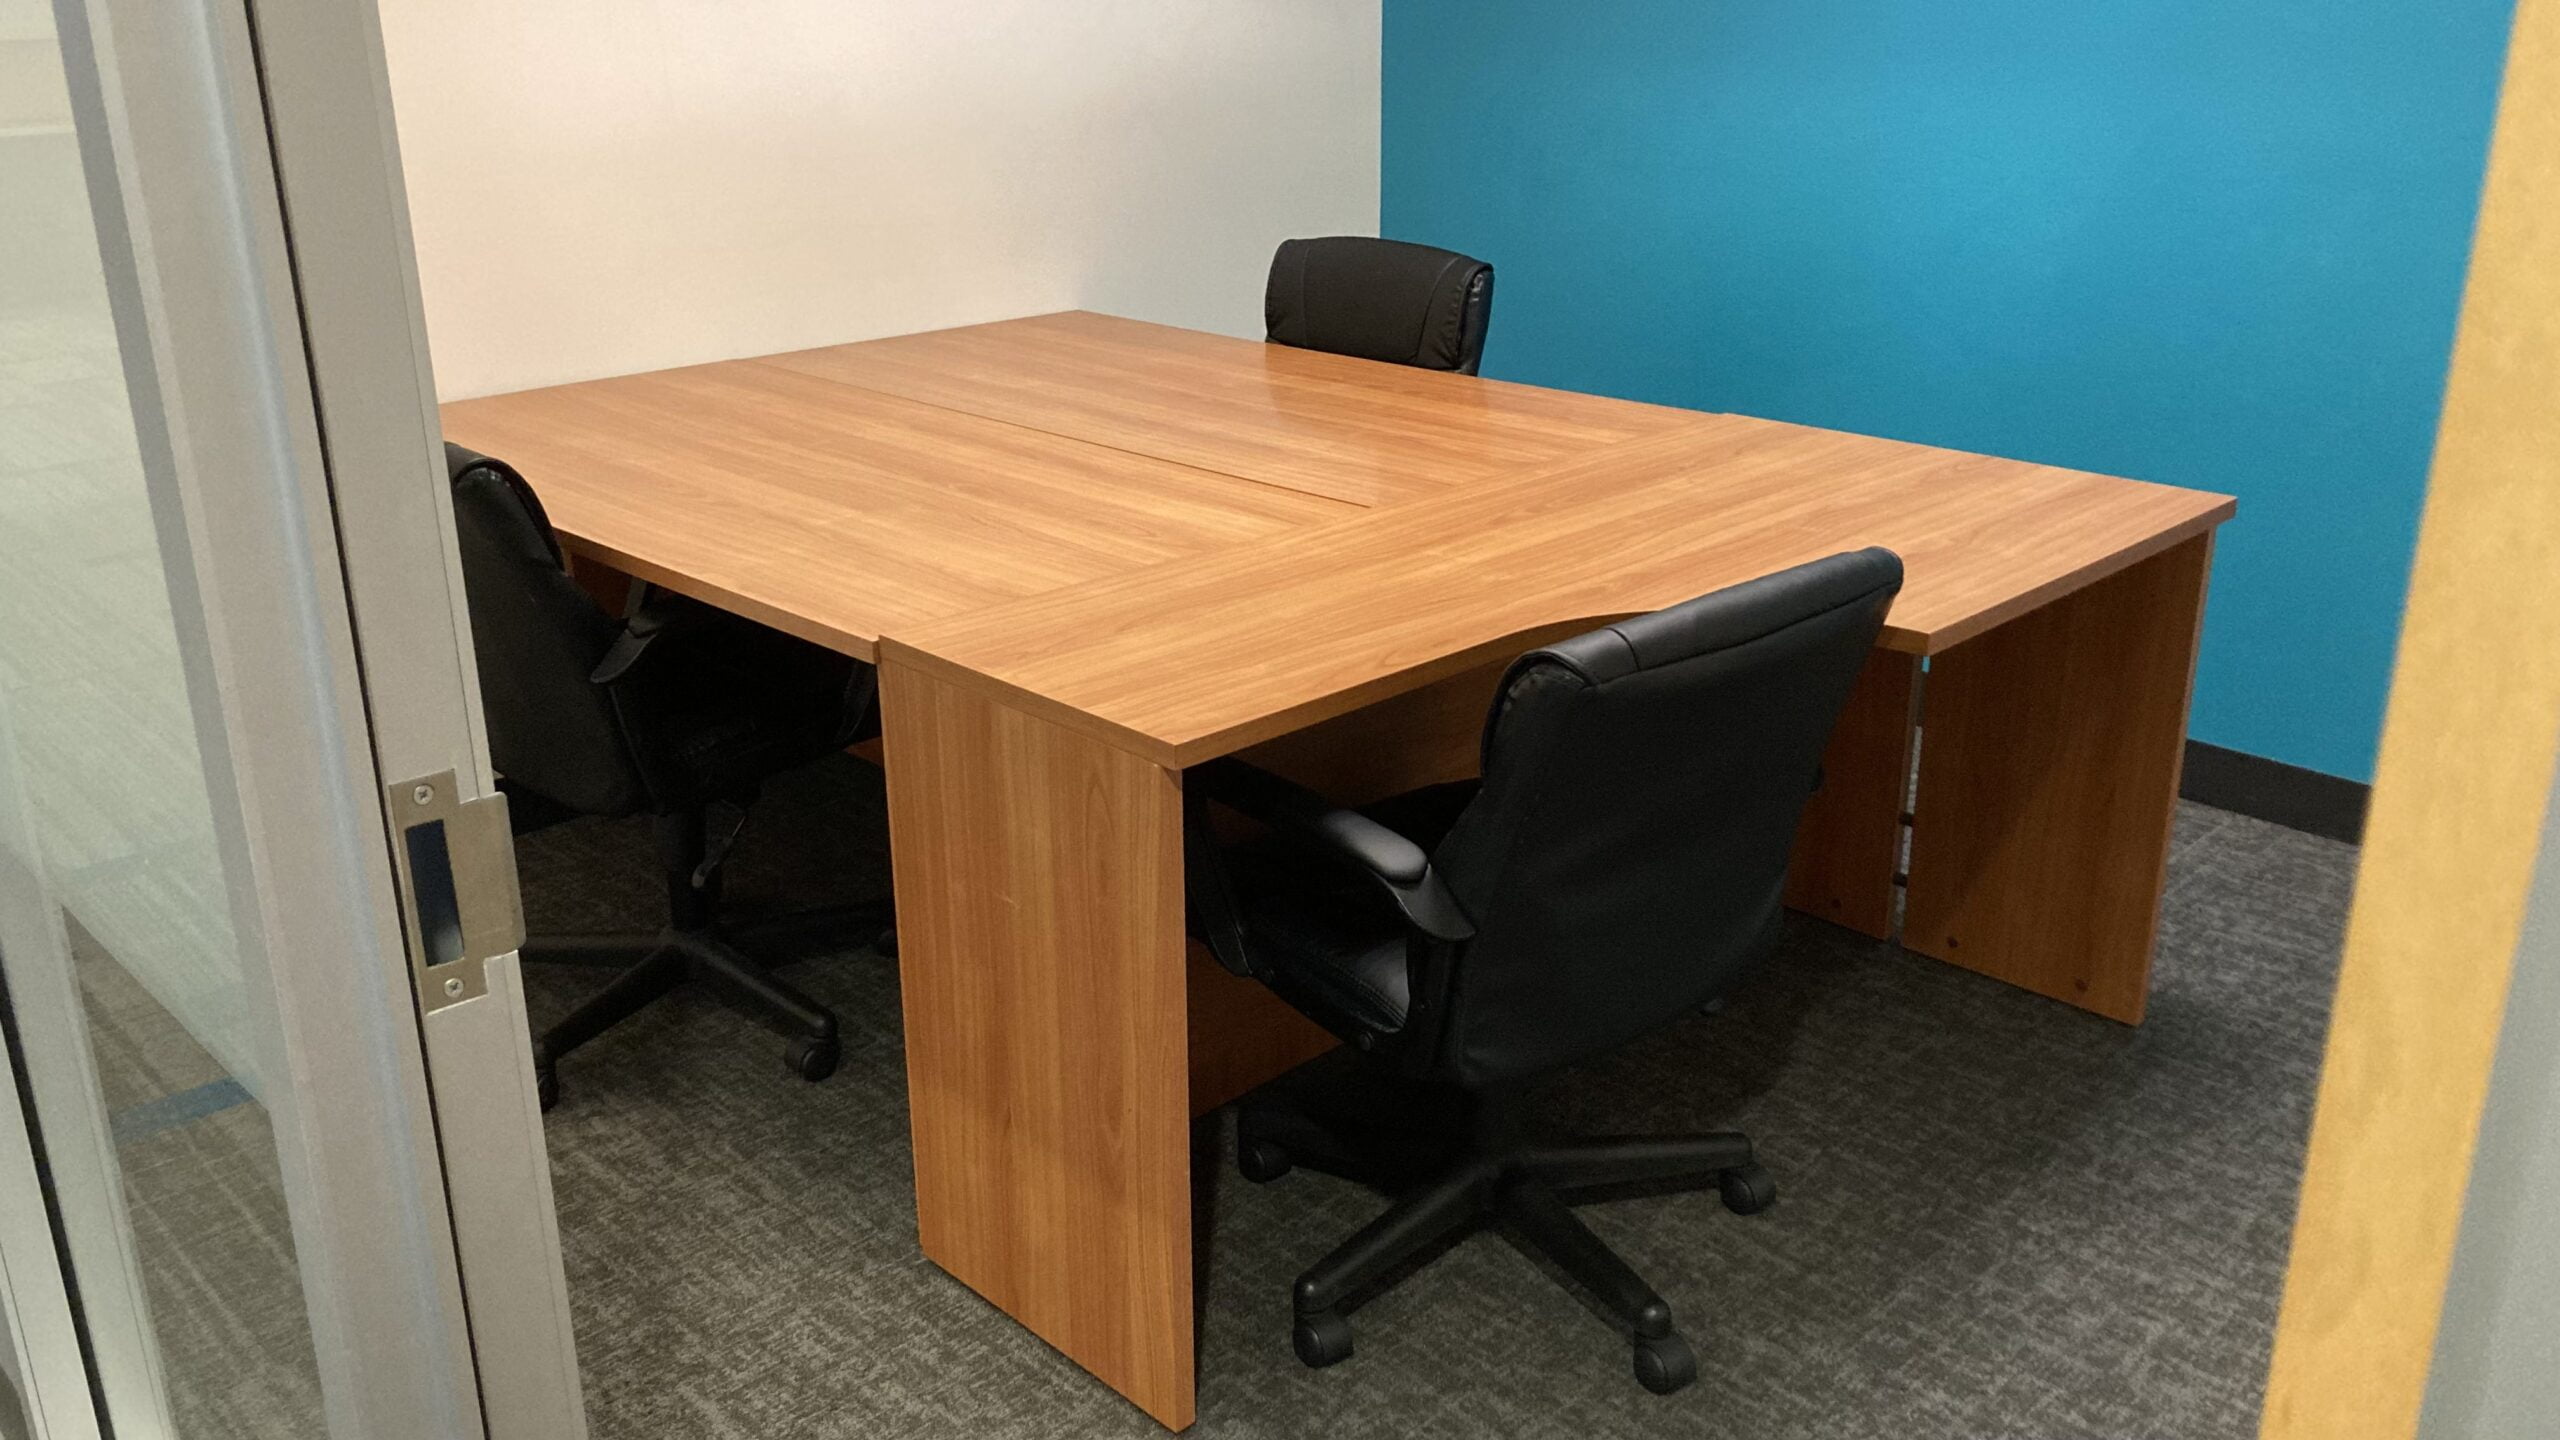 Makiki small office for rent at SURF Incubator in Downtown Seattle Washington